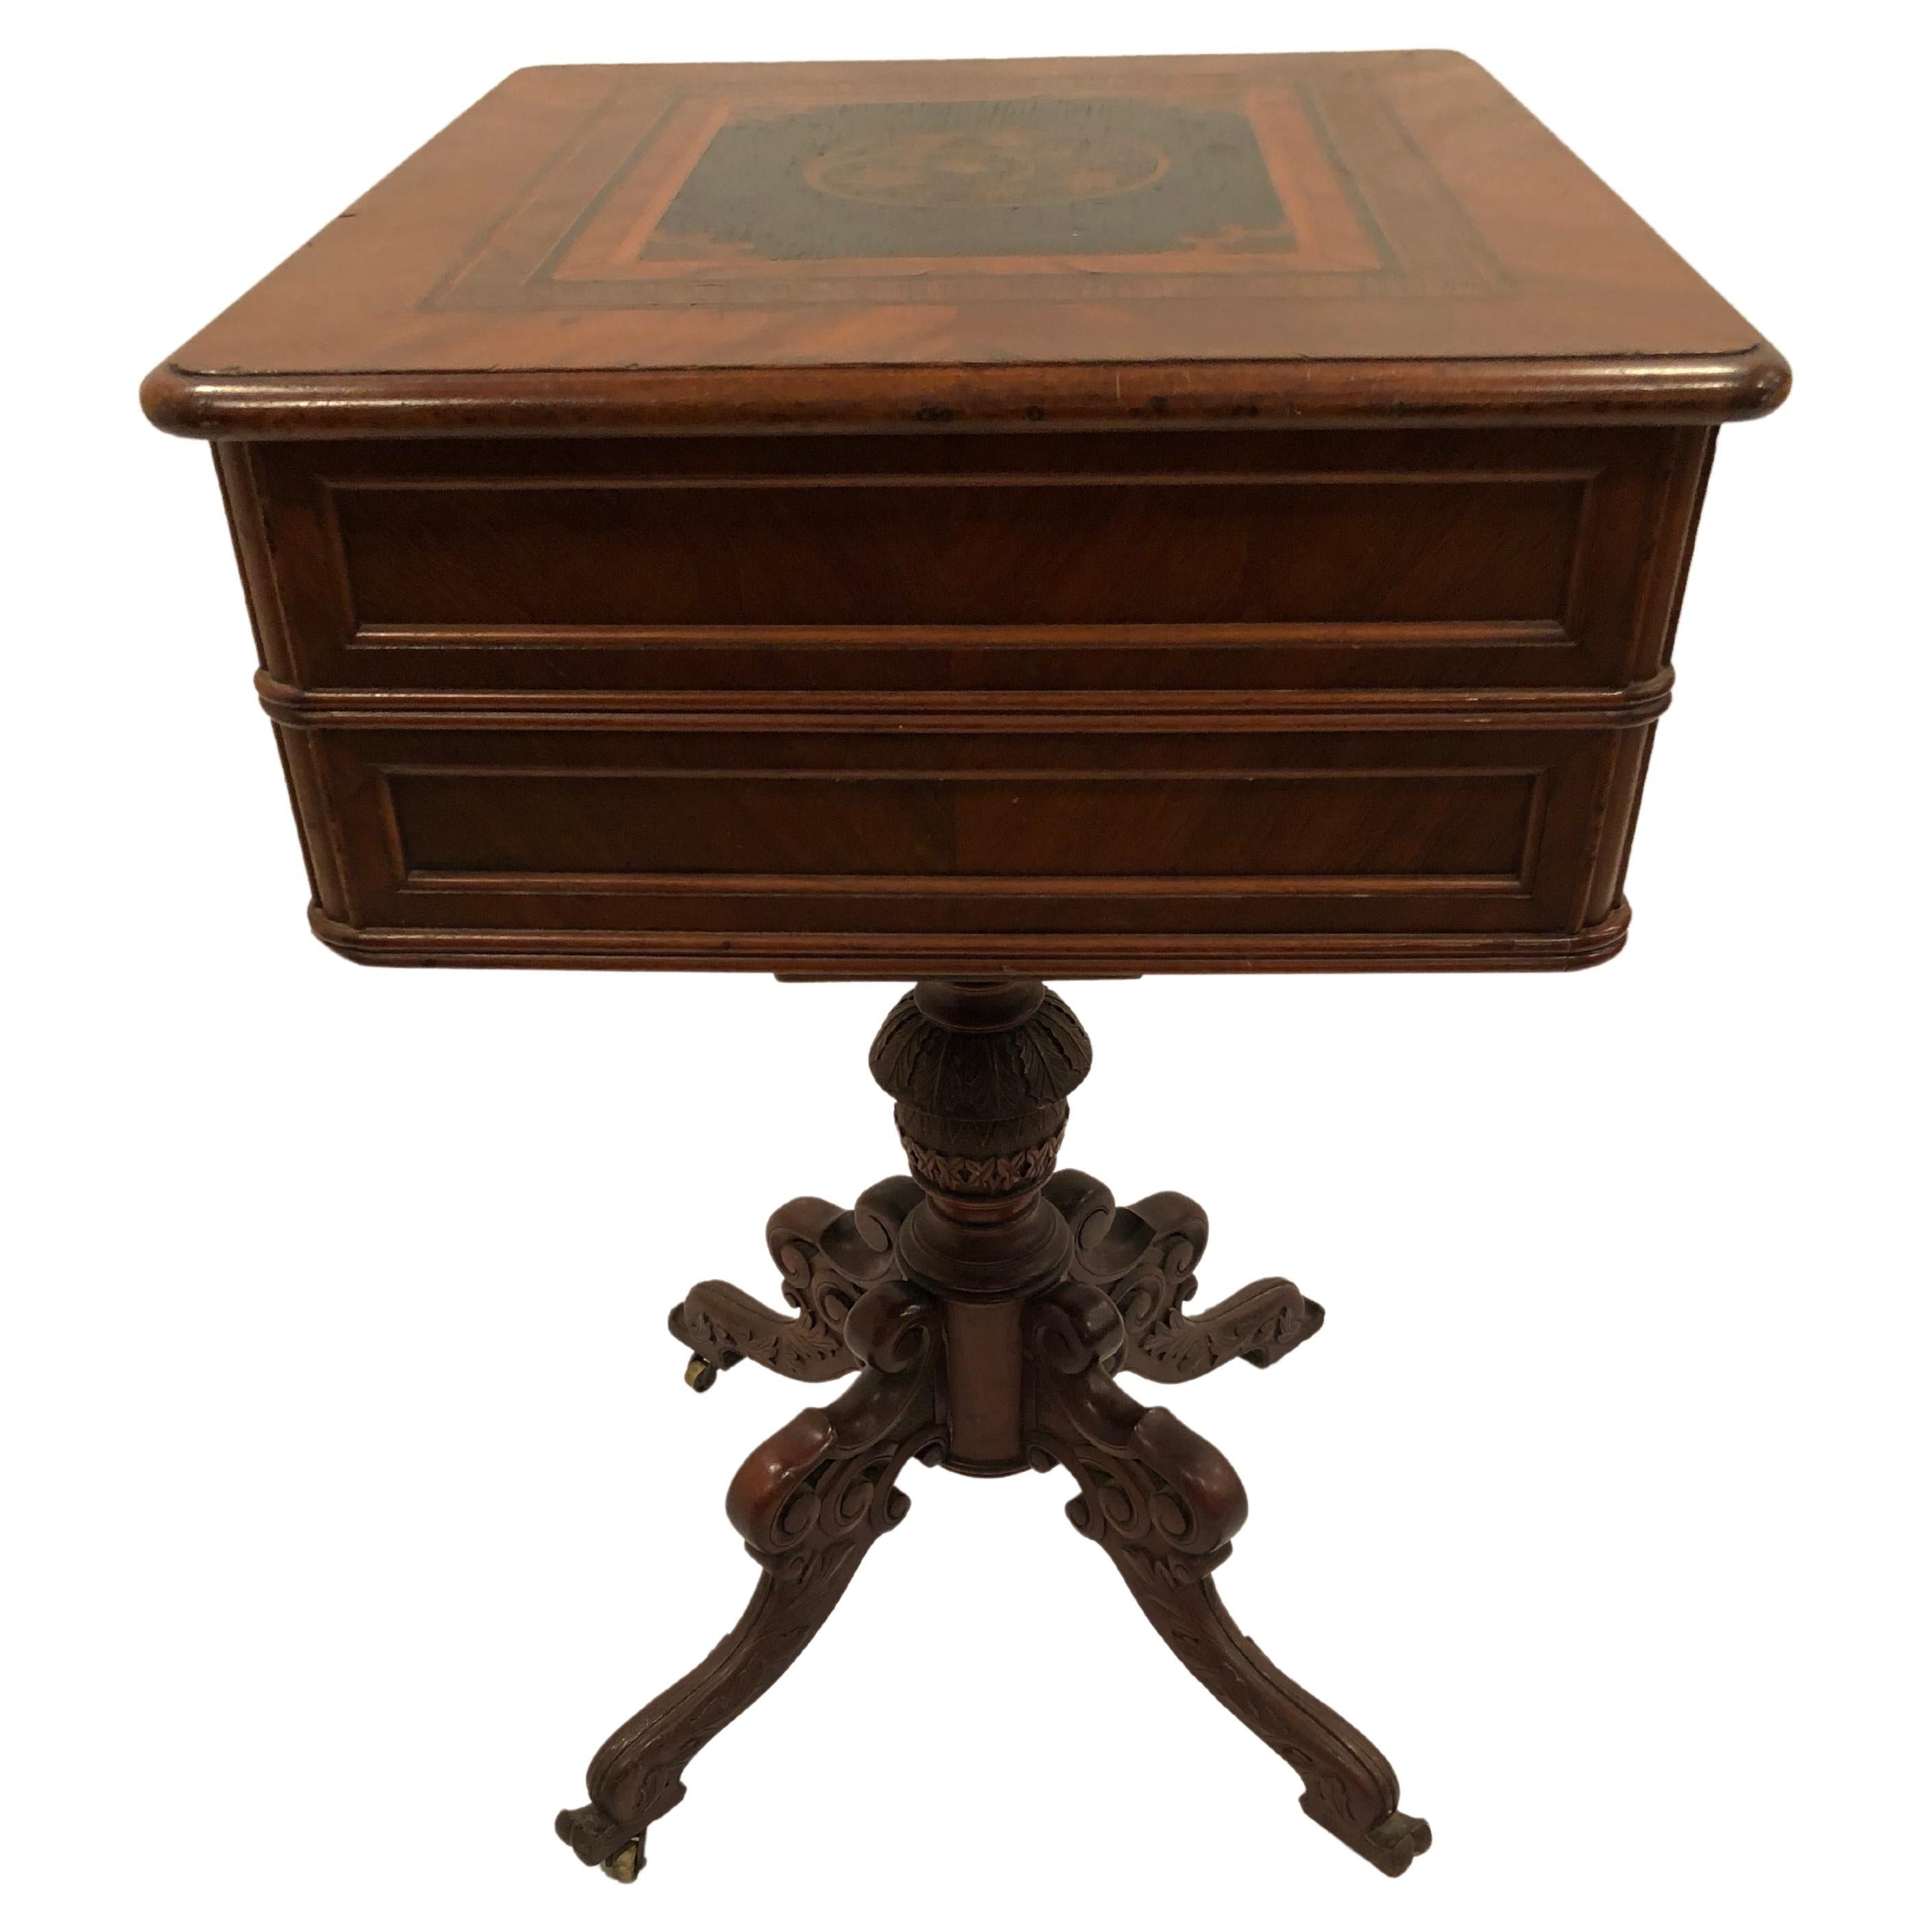 Extraordinary and rare Victorian sewing table that can be used as a gorgeous side table, having marvelous intricate inlay decoration, carved columnar base with four legs, and two drawers. The top drawer pulls out and the top opens to reveal a